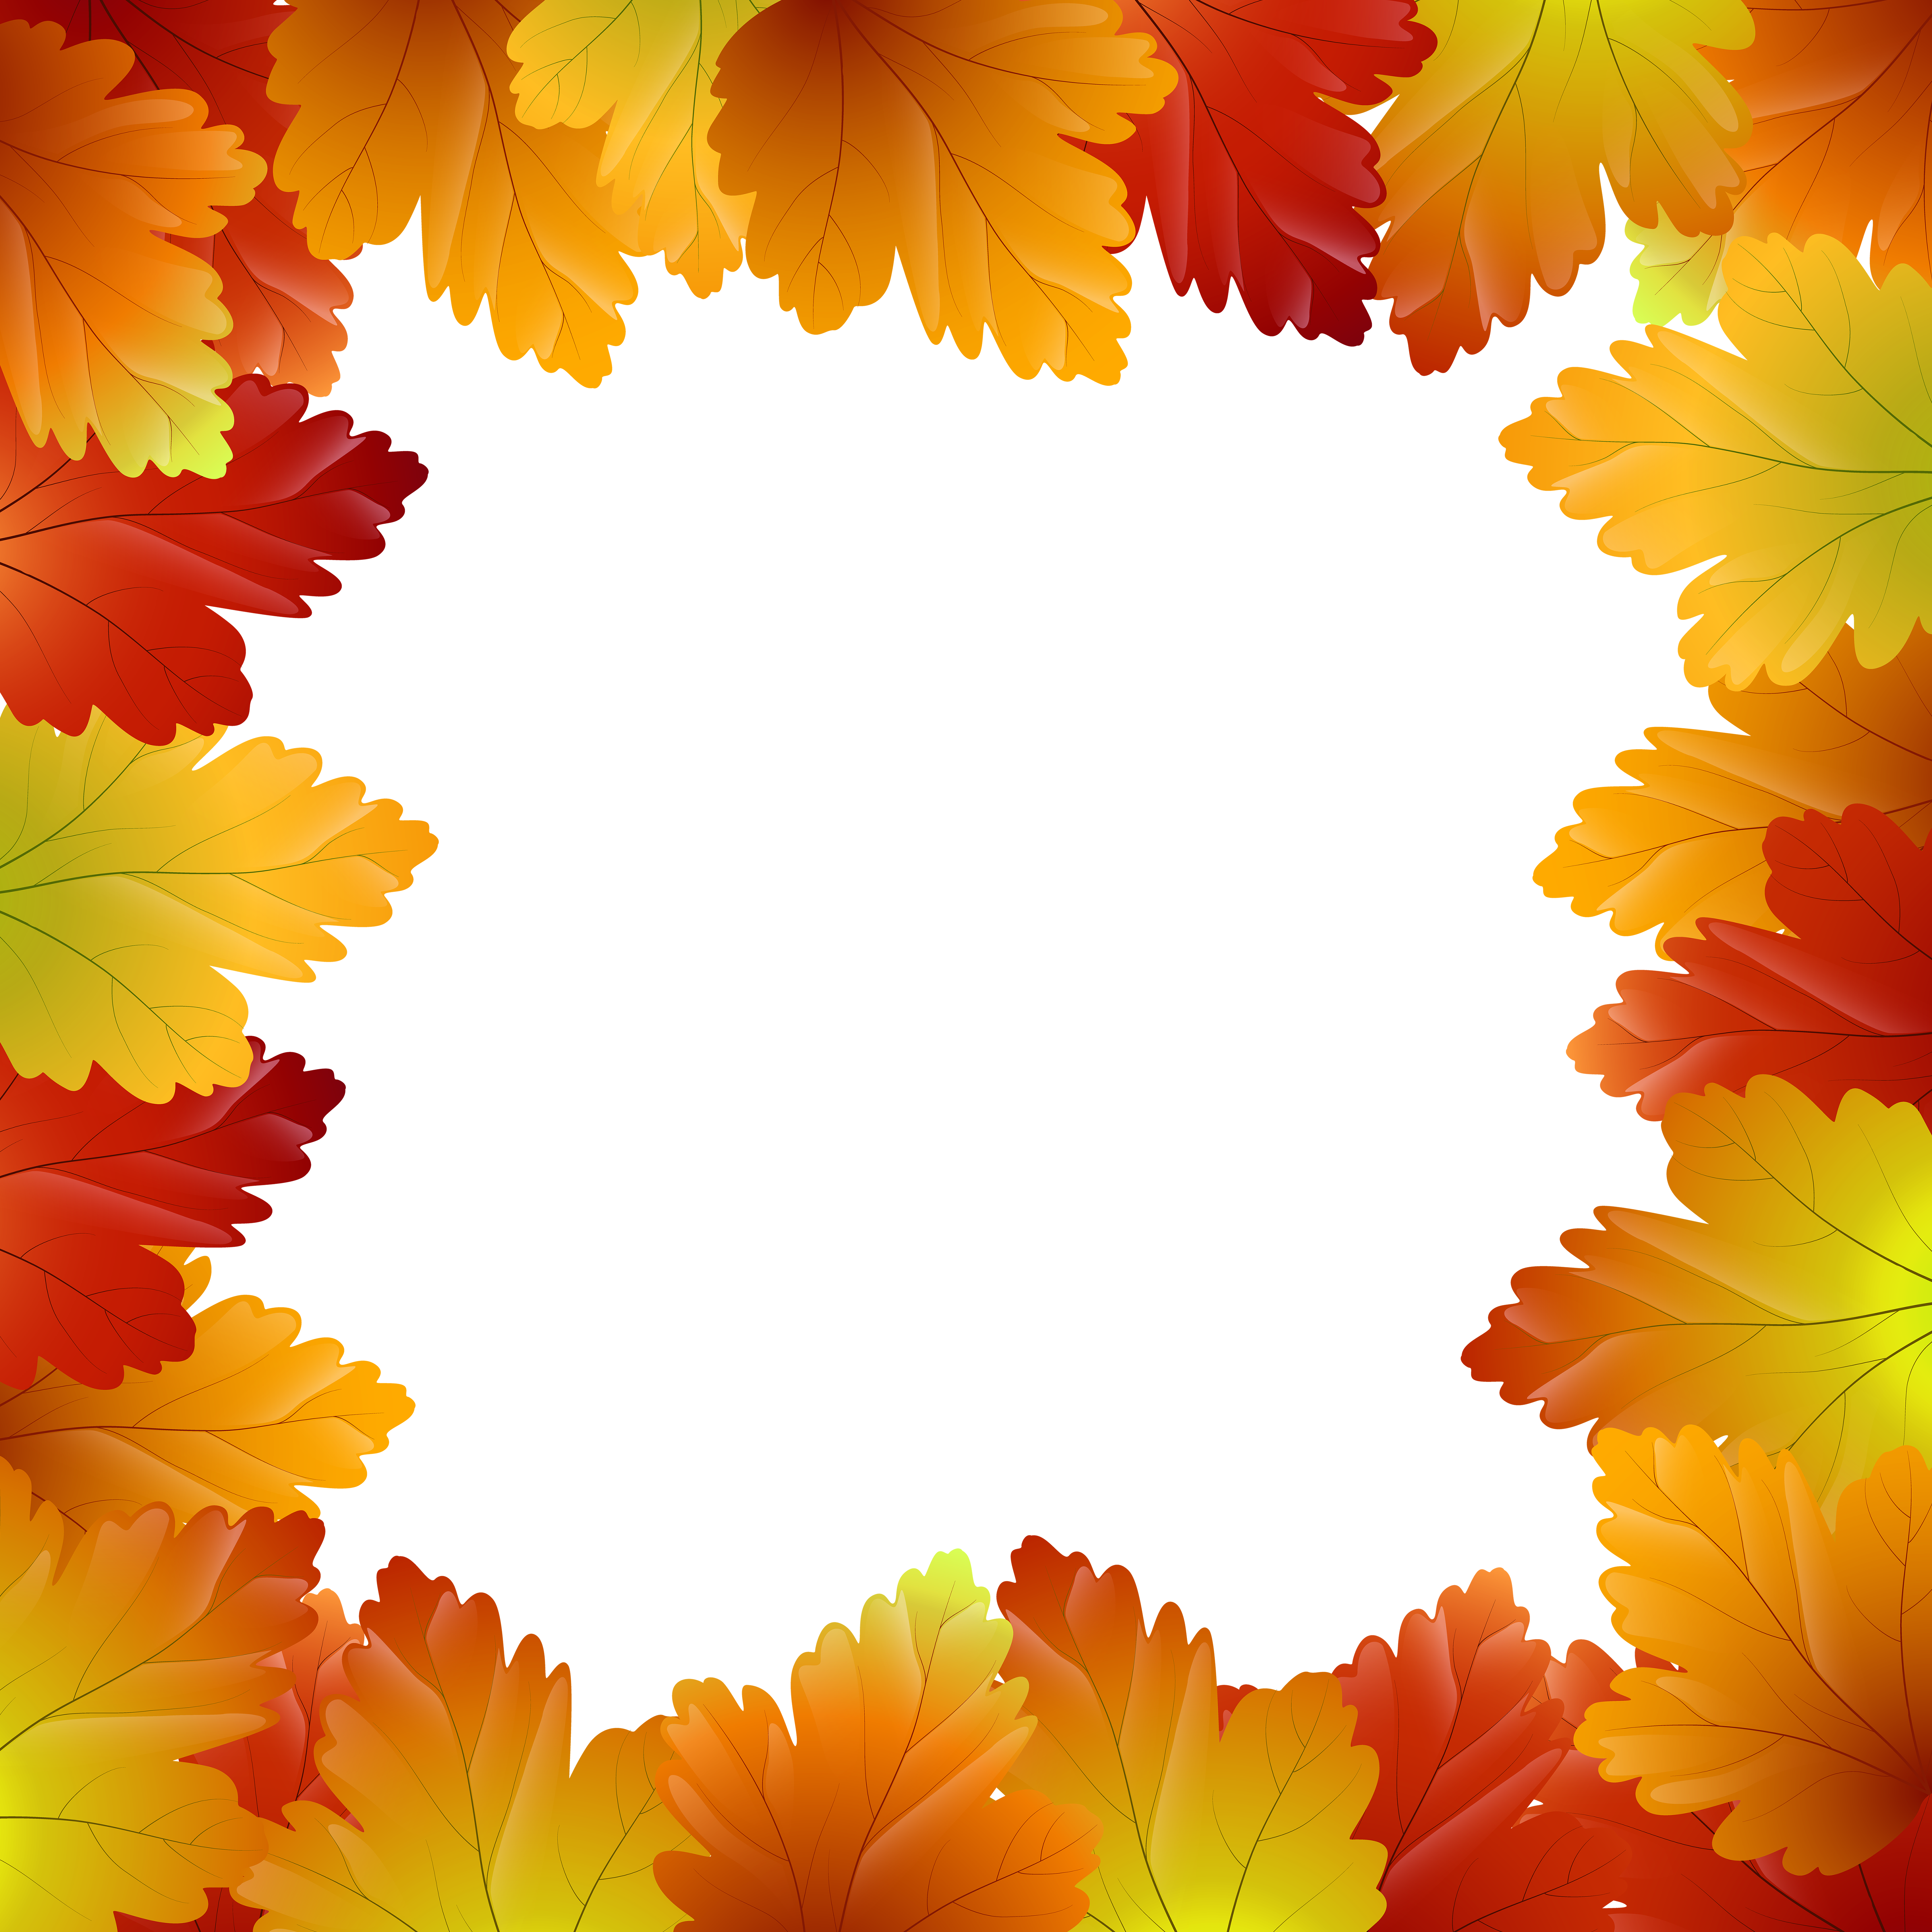 Fall Leaves Border Png Border Autumn Leaves Clip